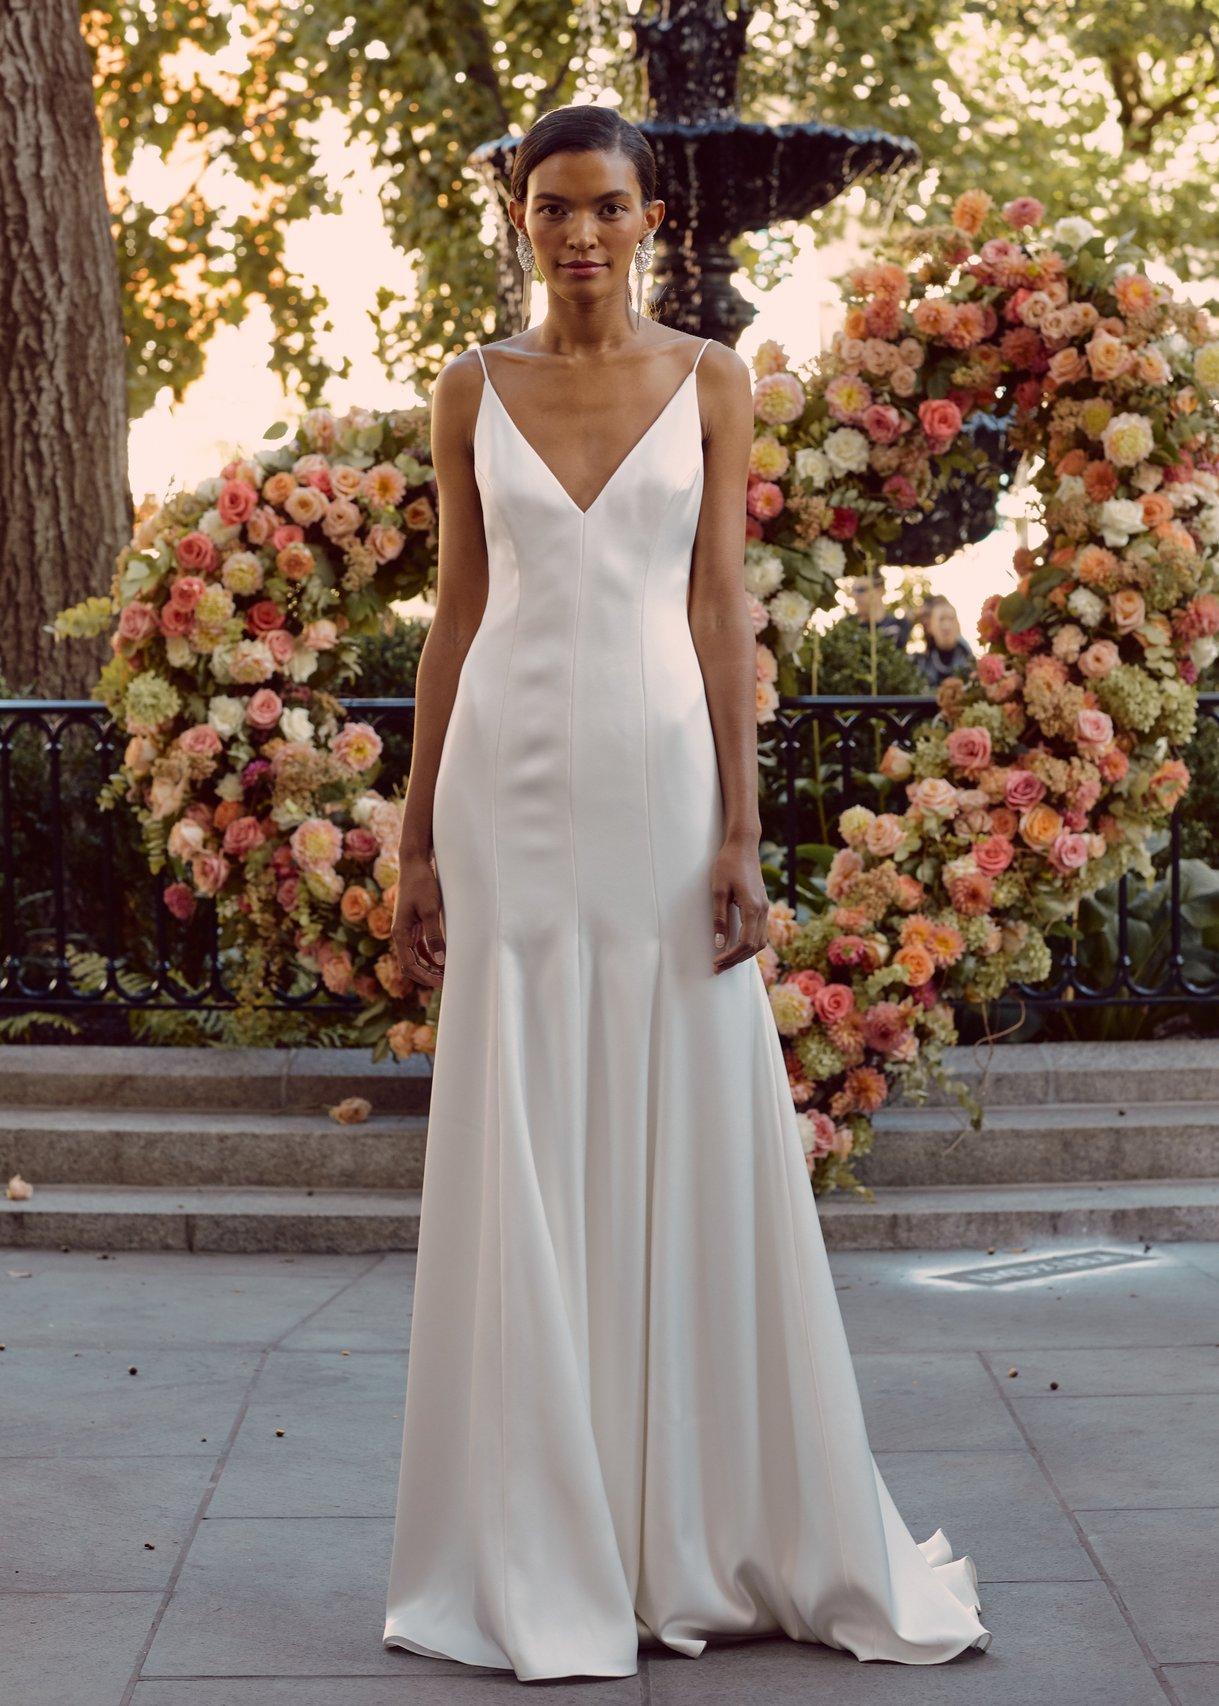 20 Simple and Elegant Wedding Dresses for the Minimalist Bride  Slip  wedding dress, Minimalist wedding dresses, Elegant wedding dress